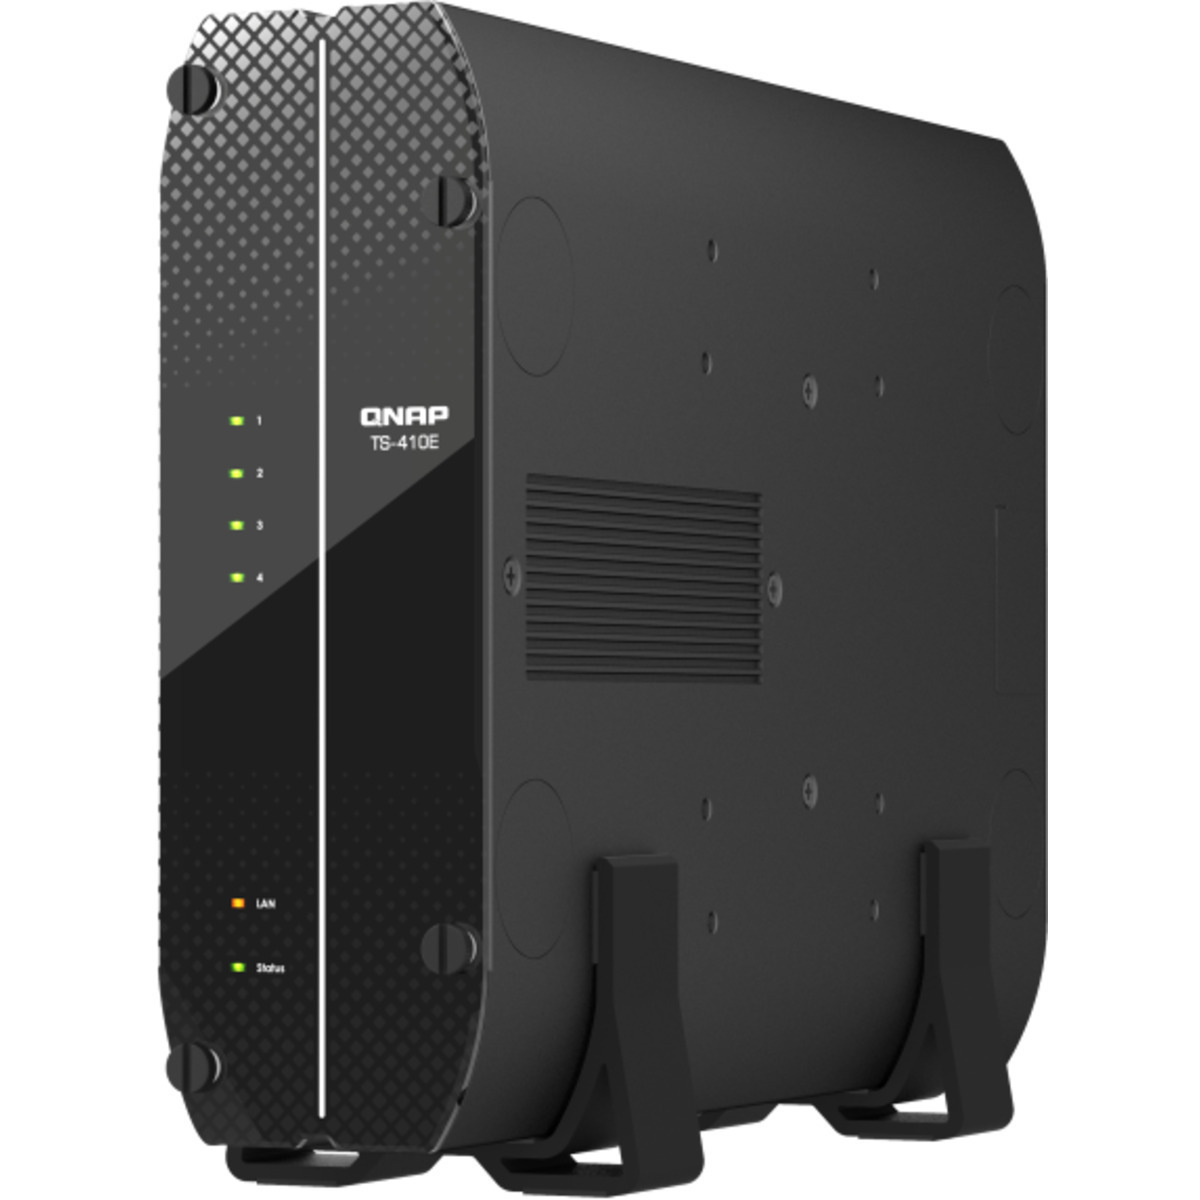 QNAP TS-410E 12tb 4-Bay Desktop Multimedia / Power User / Business NAS - Network Attached Storage Device 3x4tb Sandisk Ultra 3D SDSSDH3-4T00 2.5 560/520MB/s SATA 6Gb/s SSD CONSUMER Class Drives Installed - Burn-In Tested TS-410E